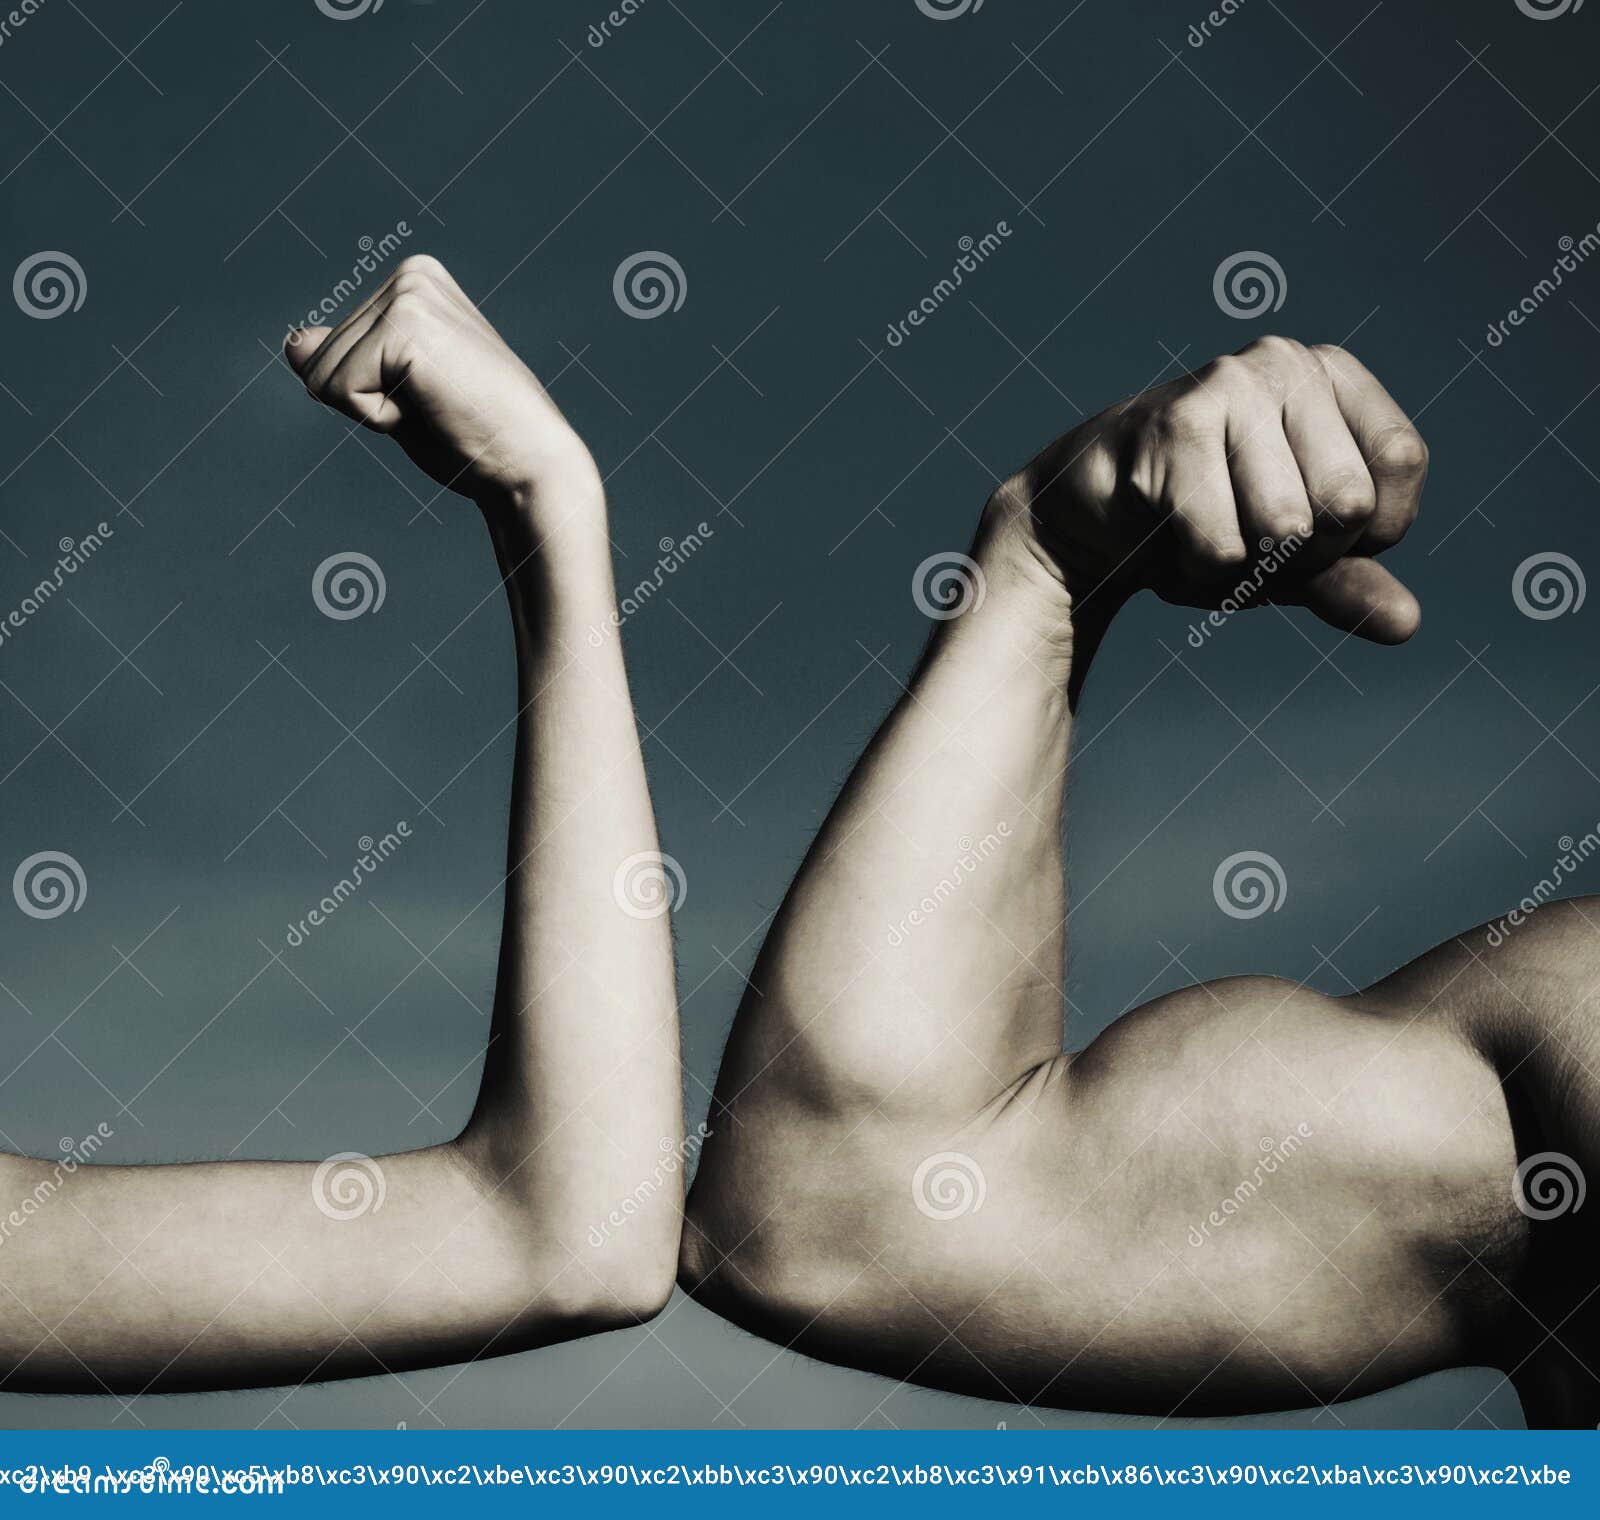 421 Arm Wrestling Man Woman Stock Photos photo picture